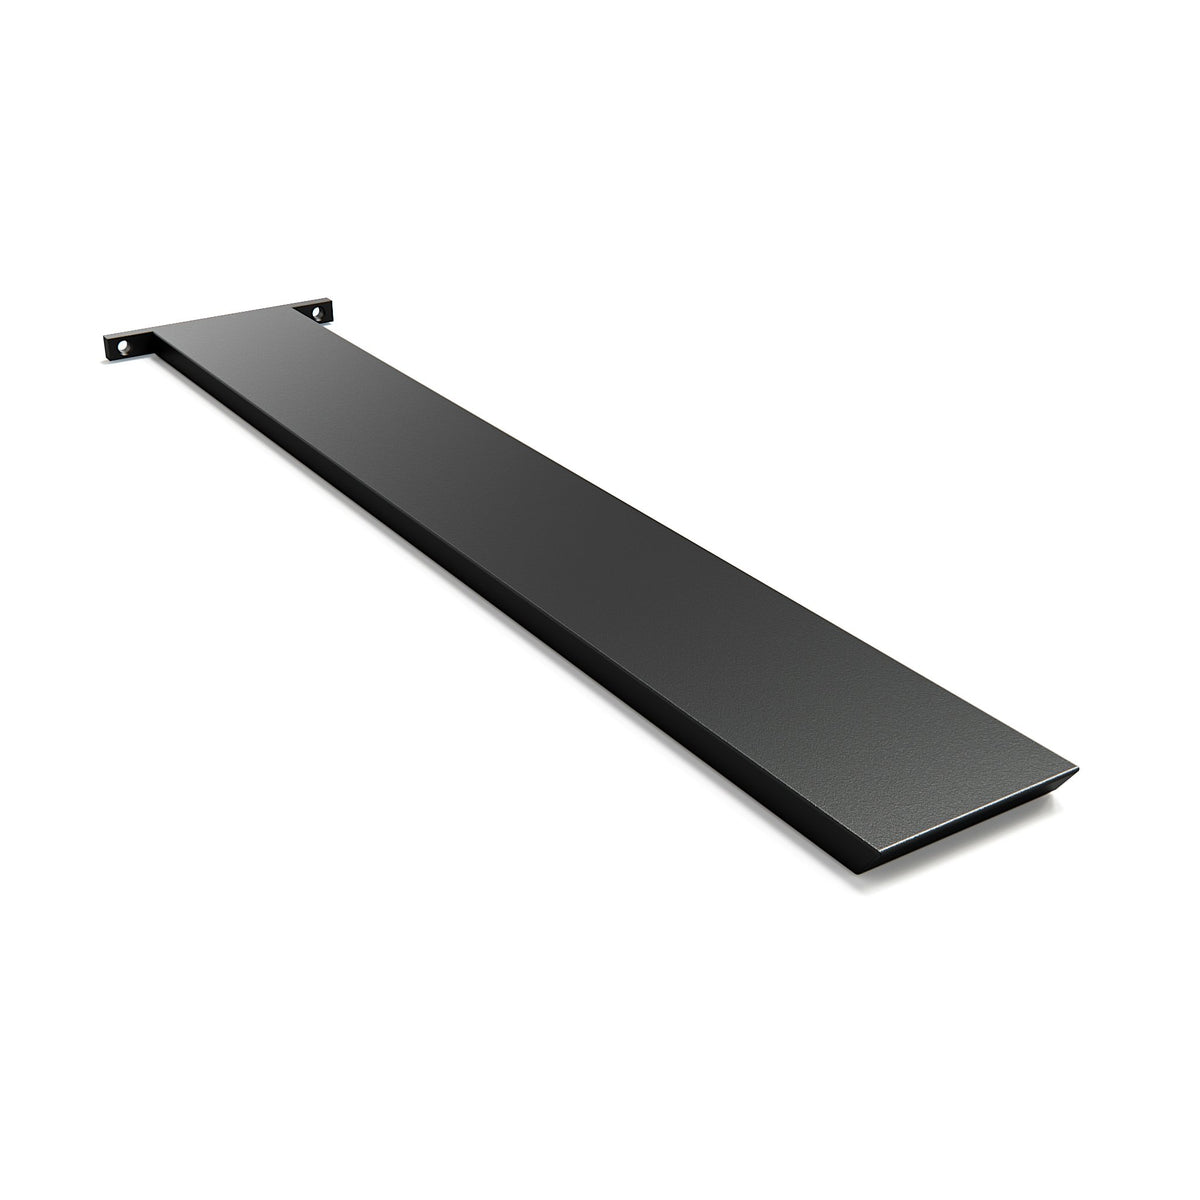 Hidden Island Countertop Bracket in black finish. Evenly distributed support for large countertops.